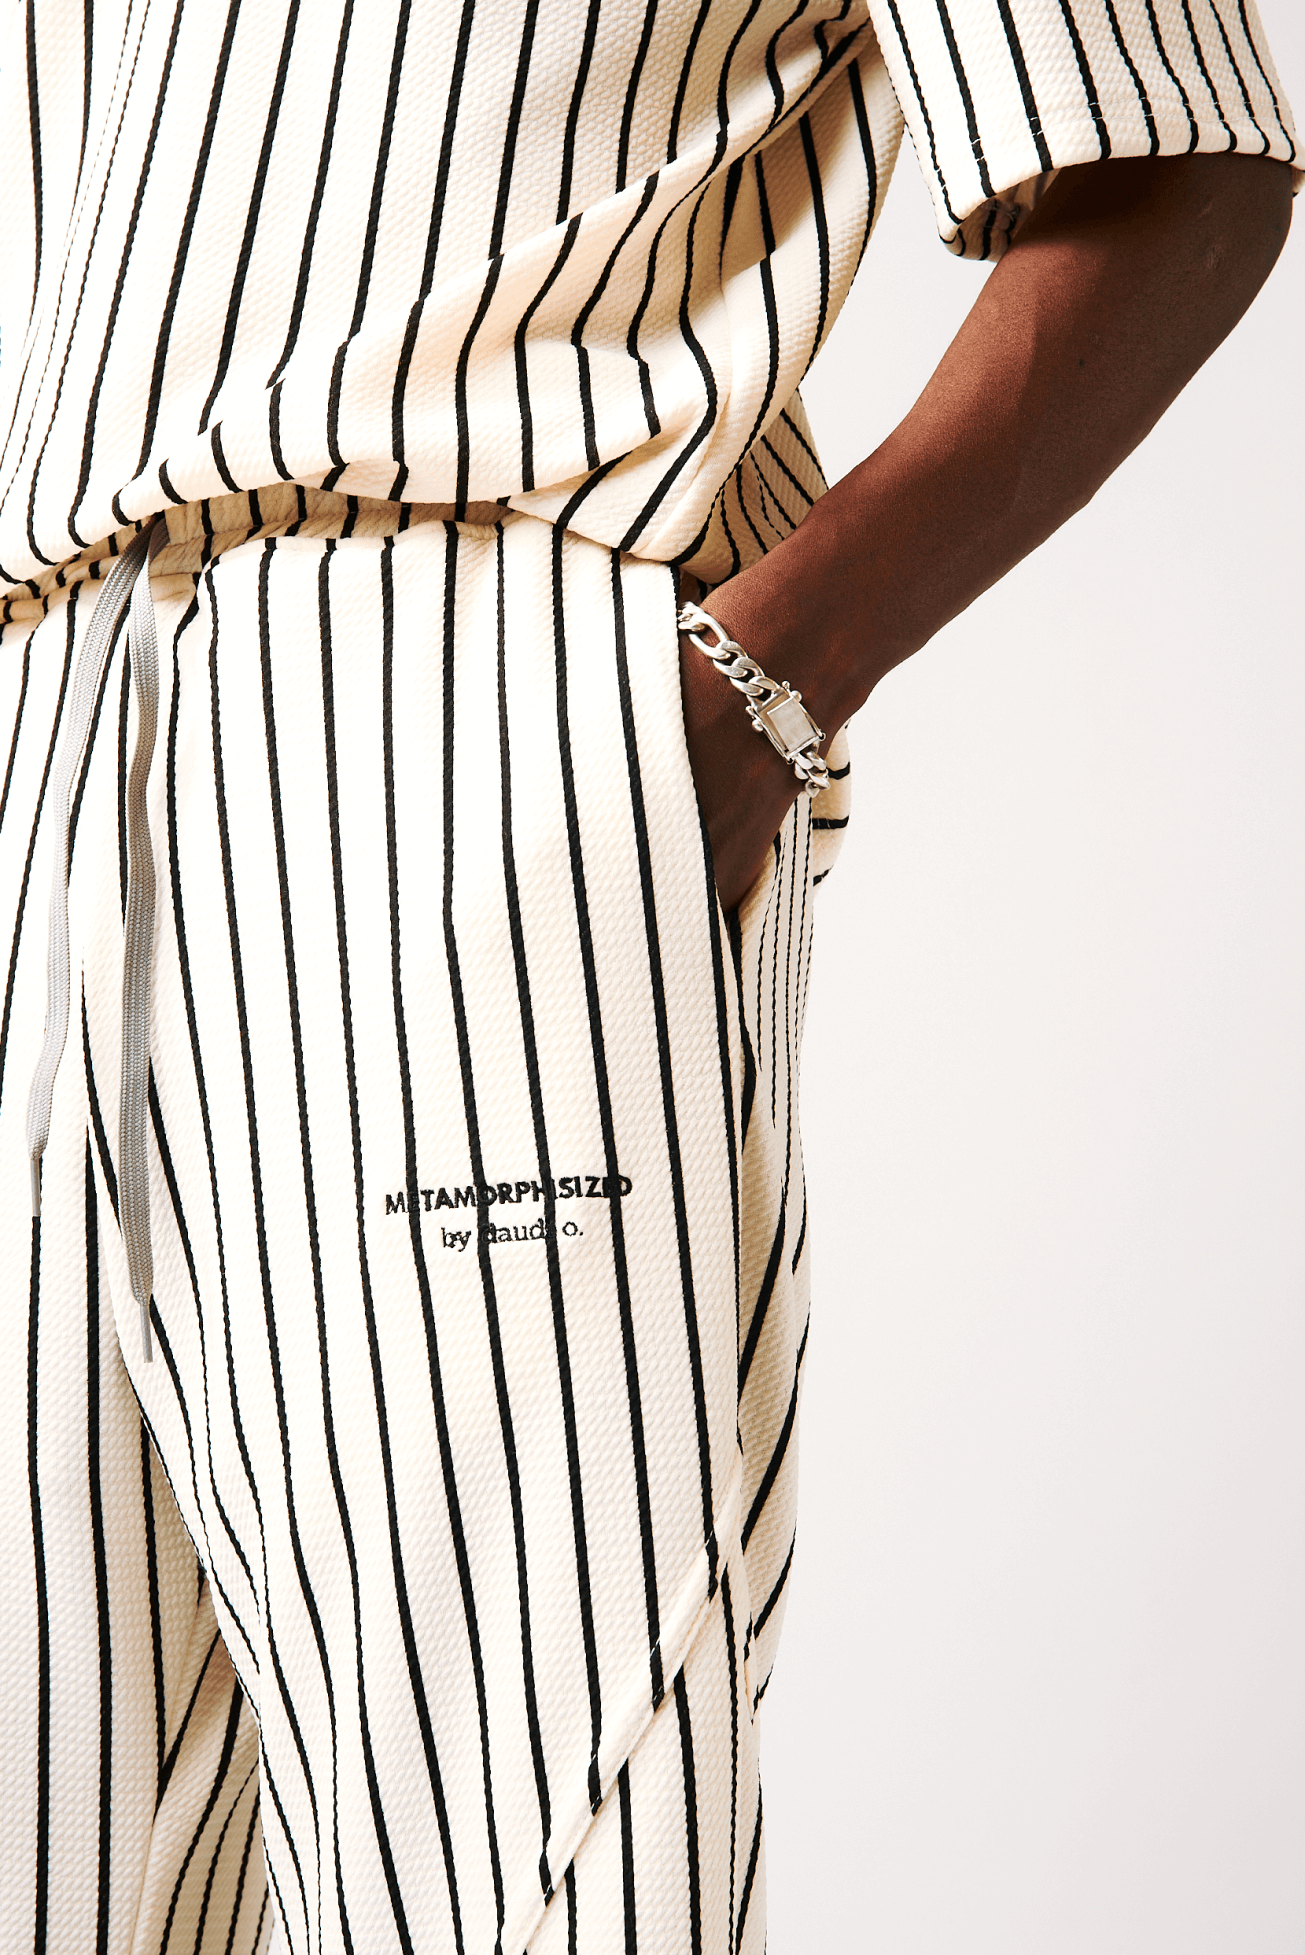 Shop Bahari Striped Pants by Metamorphisized on Arrai. Discover stylish, affordable clothing, jewelry, handbags and unique handmade pieces from top Kenyan & African fashion brands prioritising sustainability and quality craftsmanship.